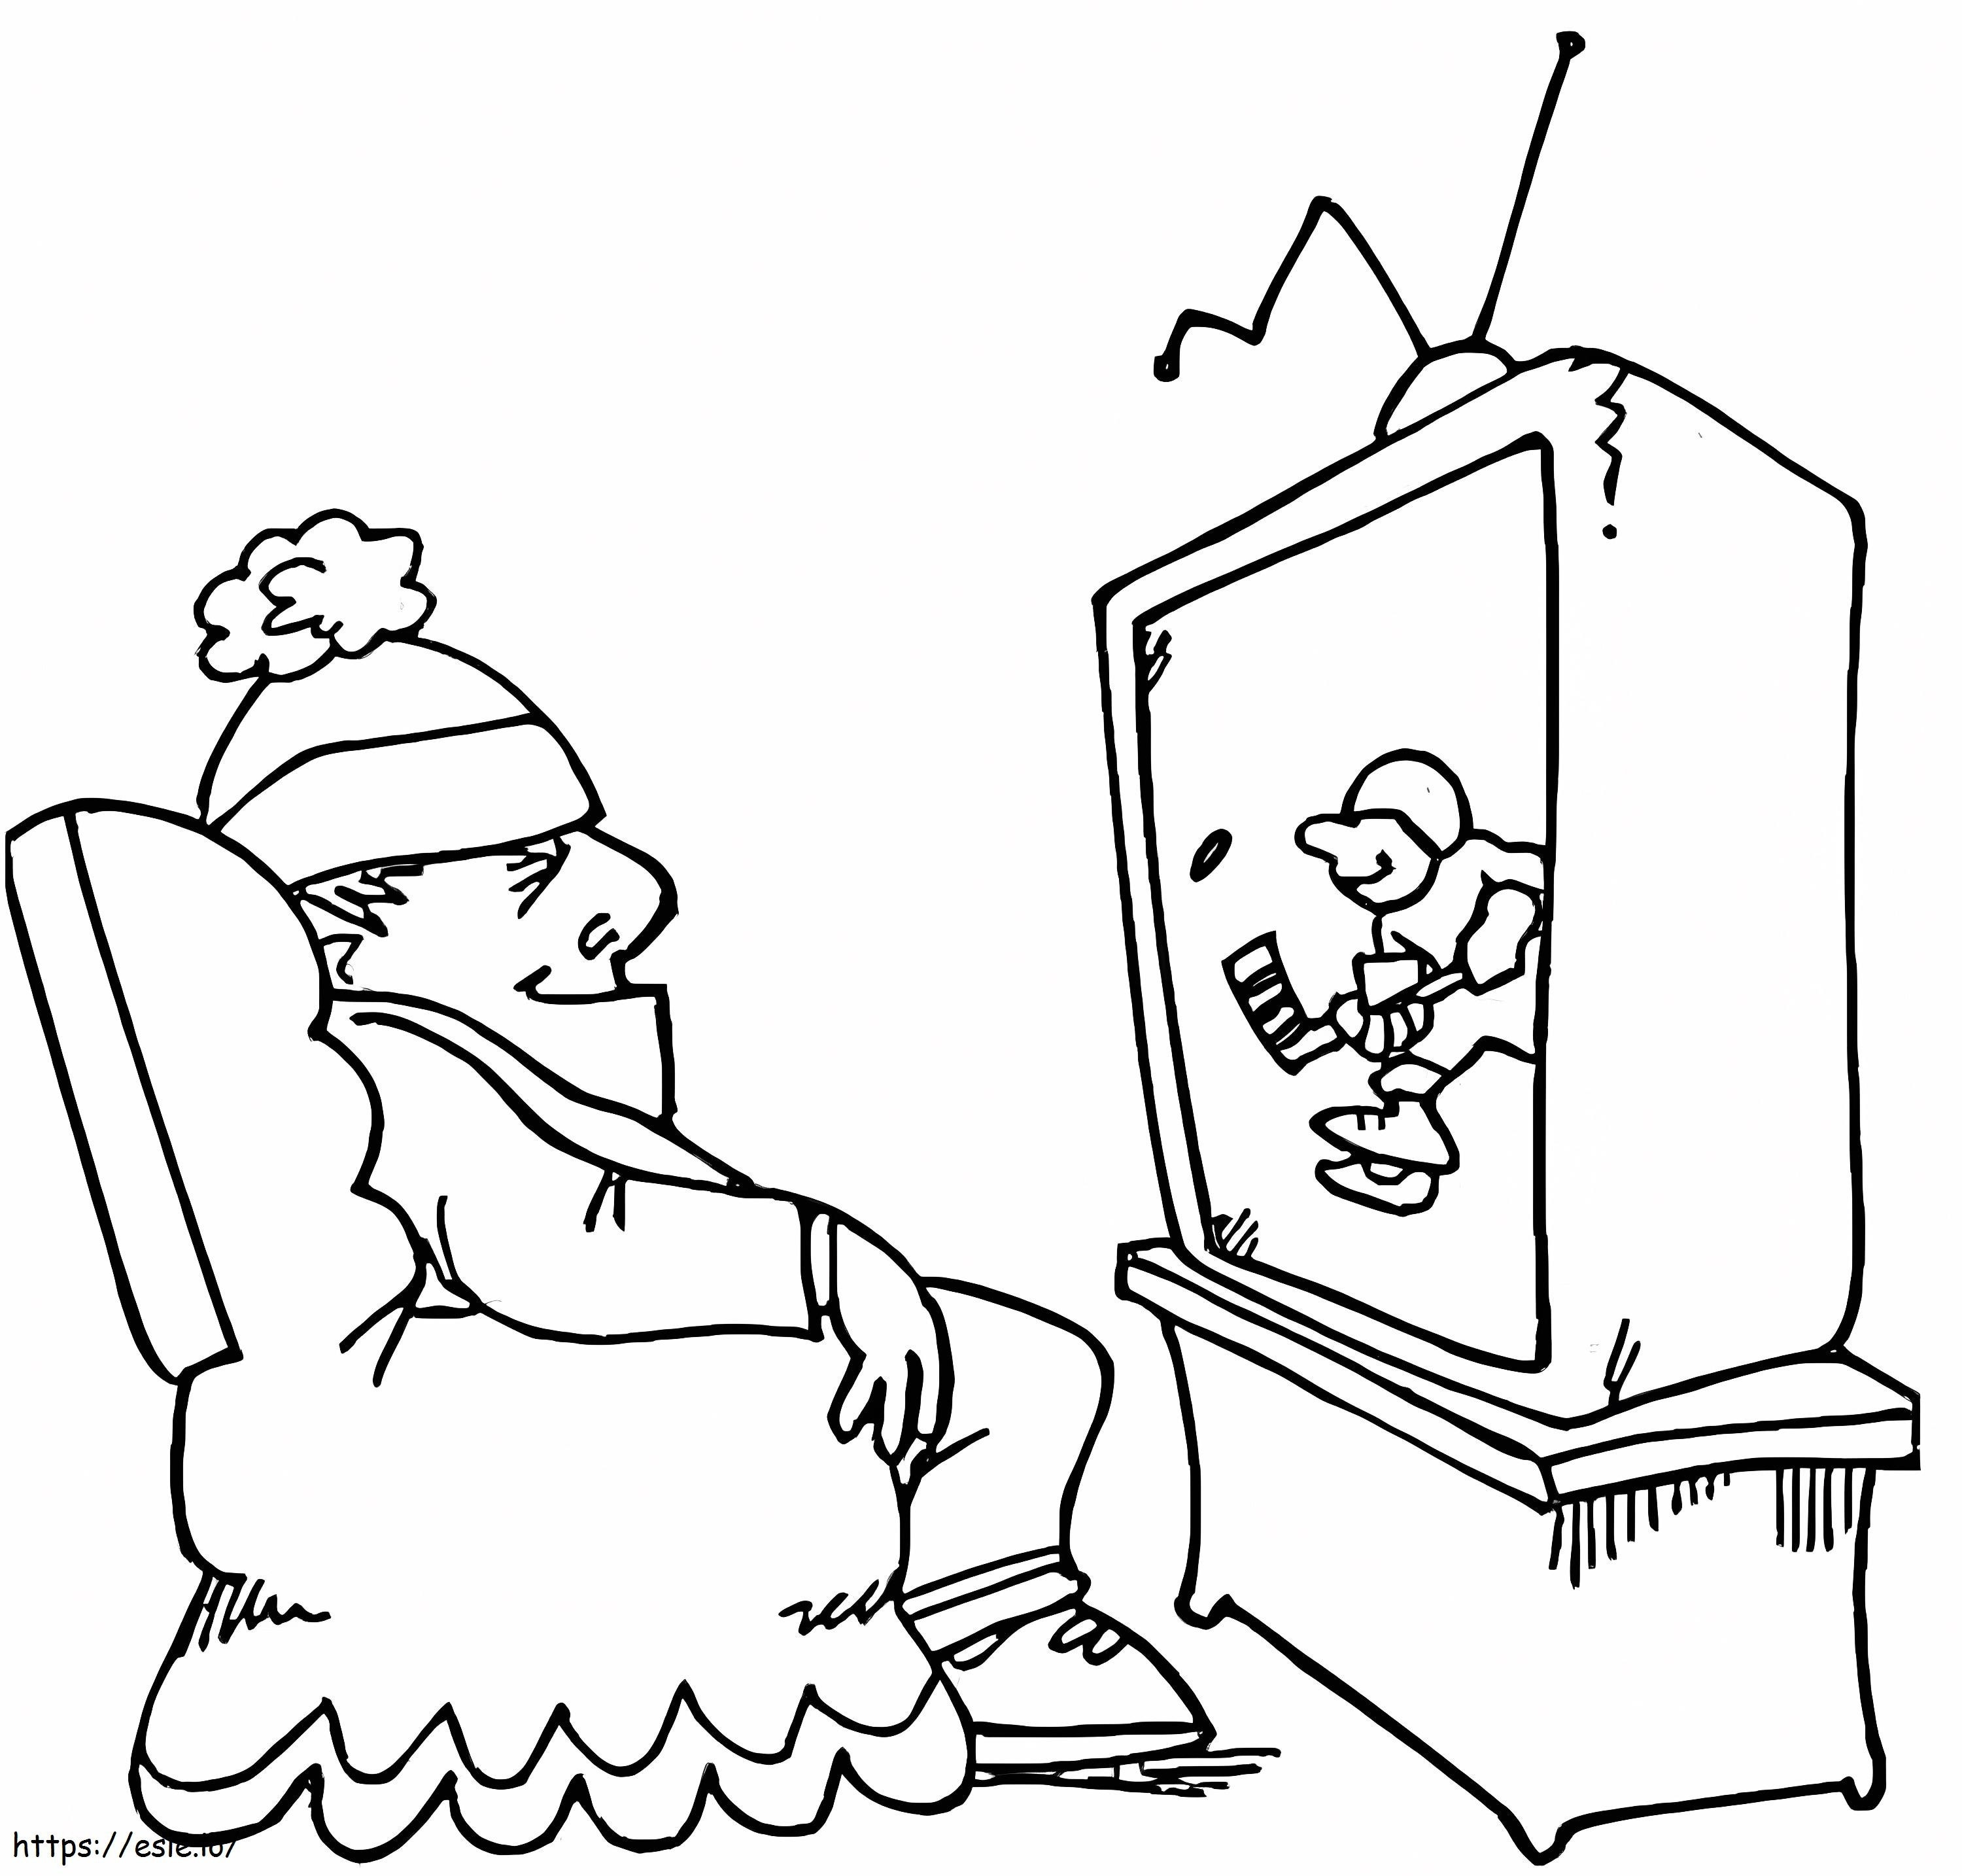 Watching Hockey coloring page